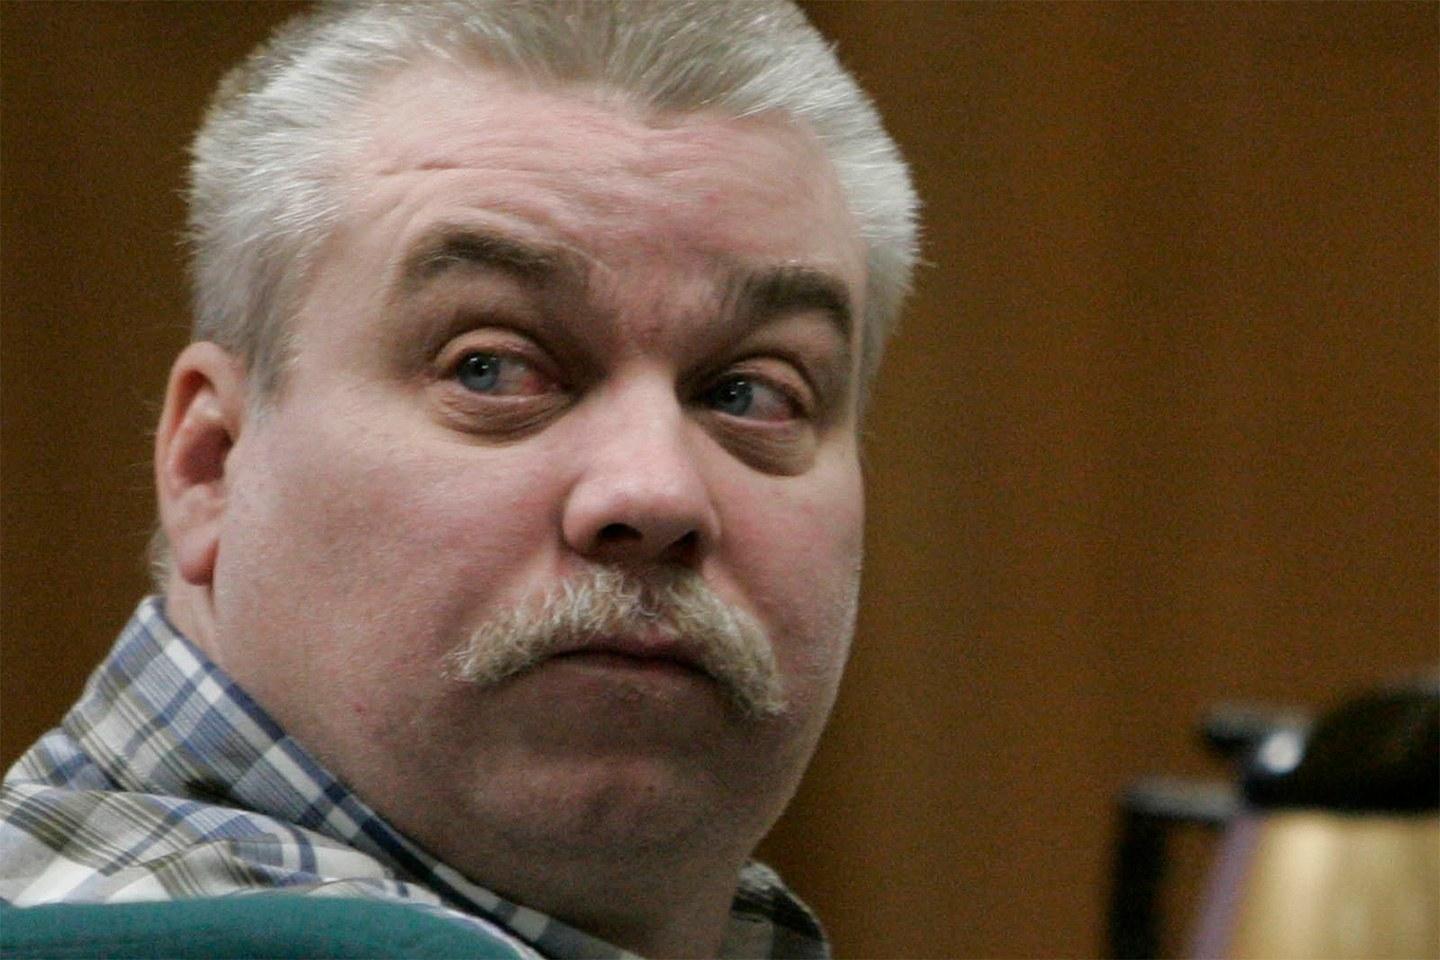 Making a Murderer rival series showing different side to Steven Avery